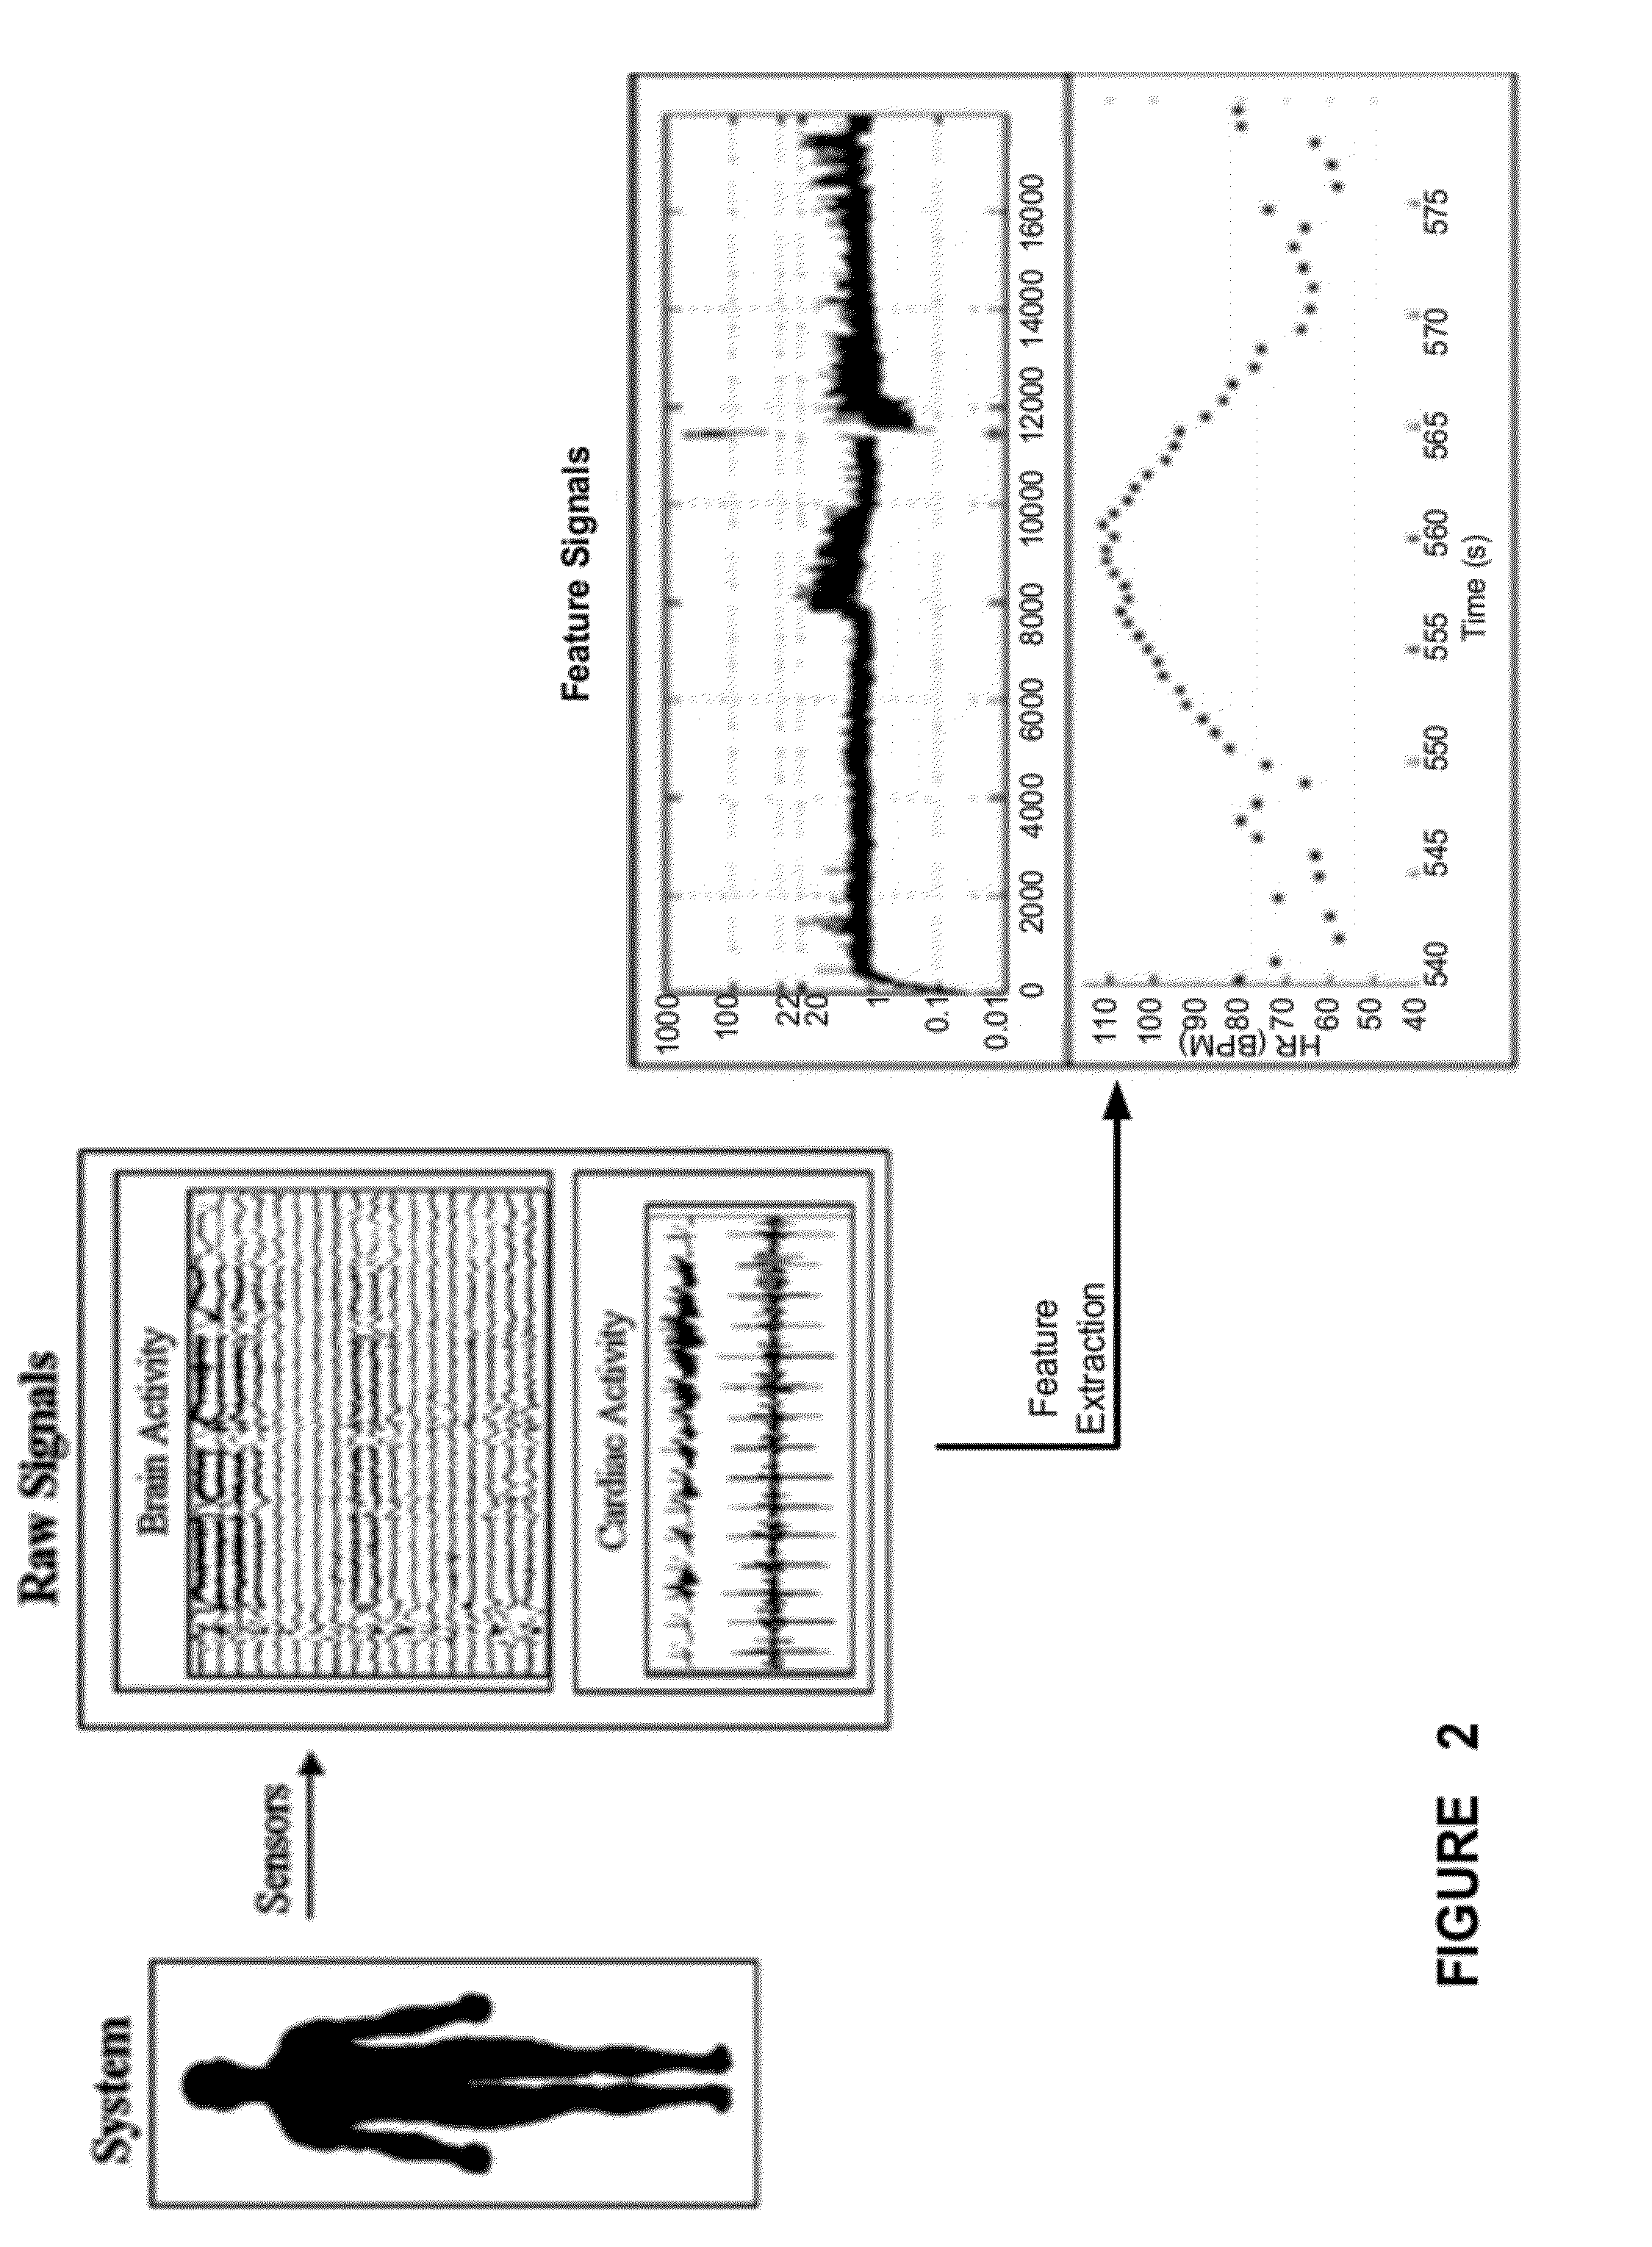 Detecting, Assessing and Managing Epilepsy Using a Multi-Variate, Metric-Based Classification Analysis